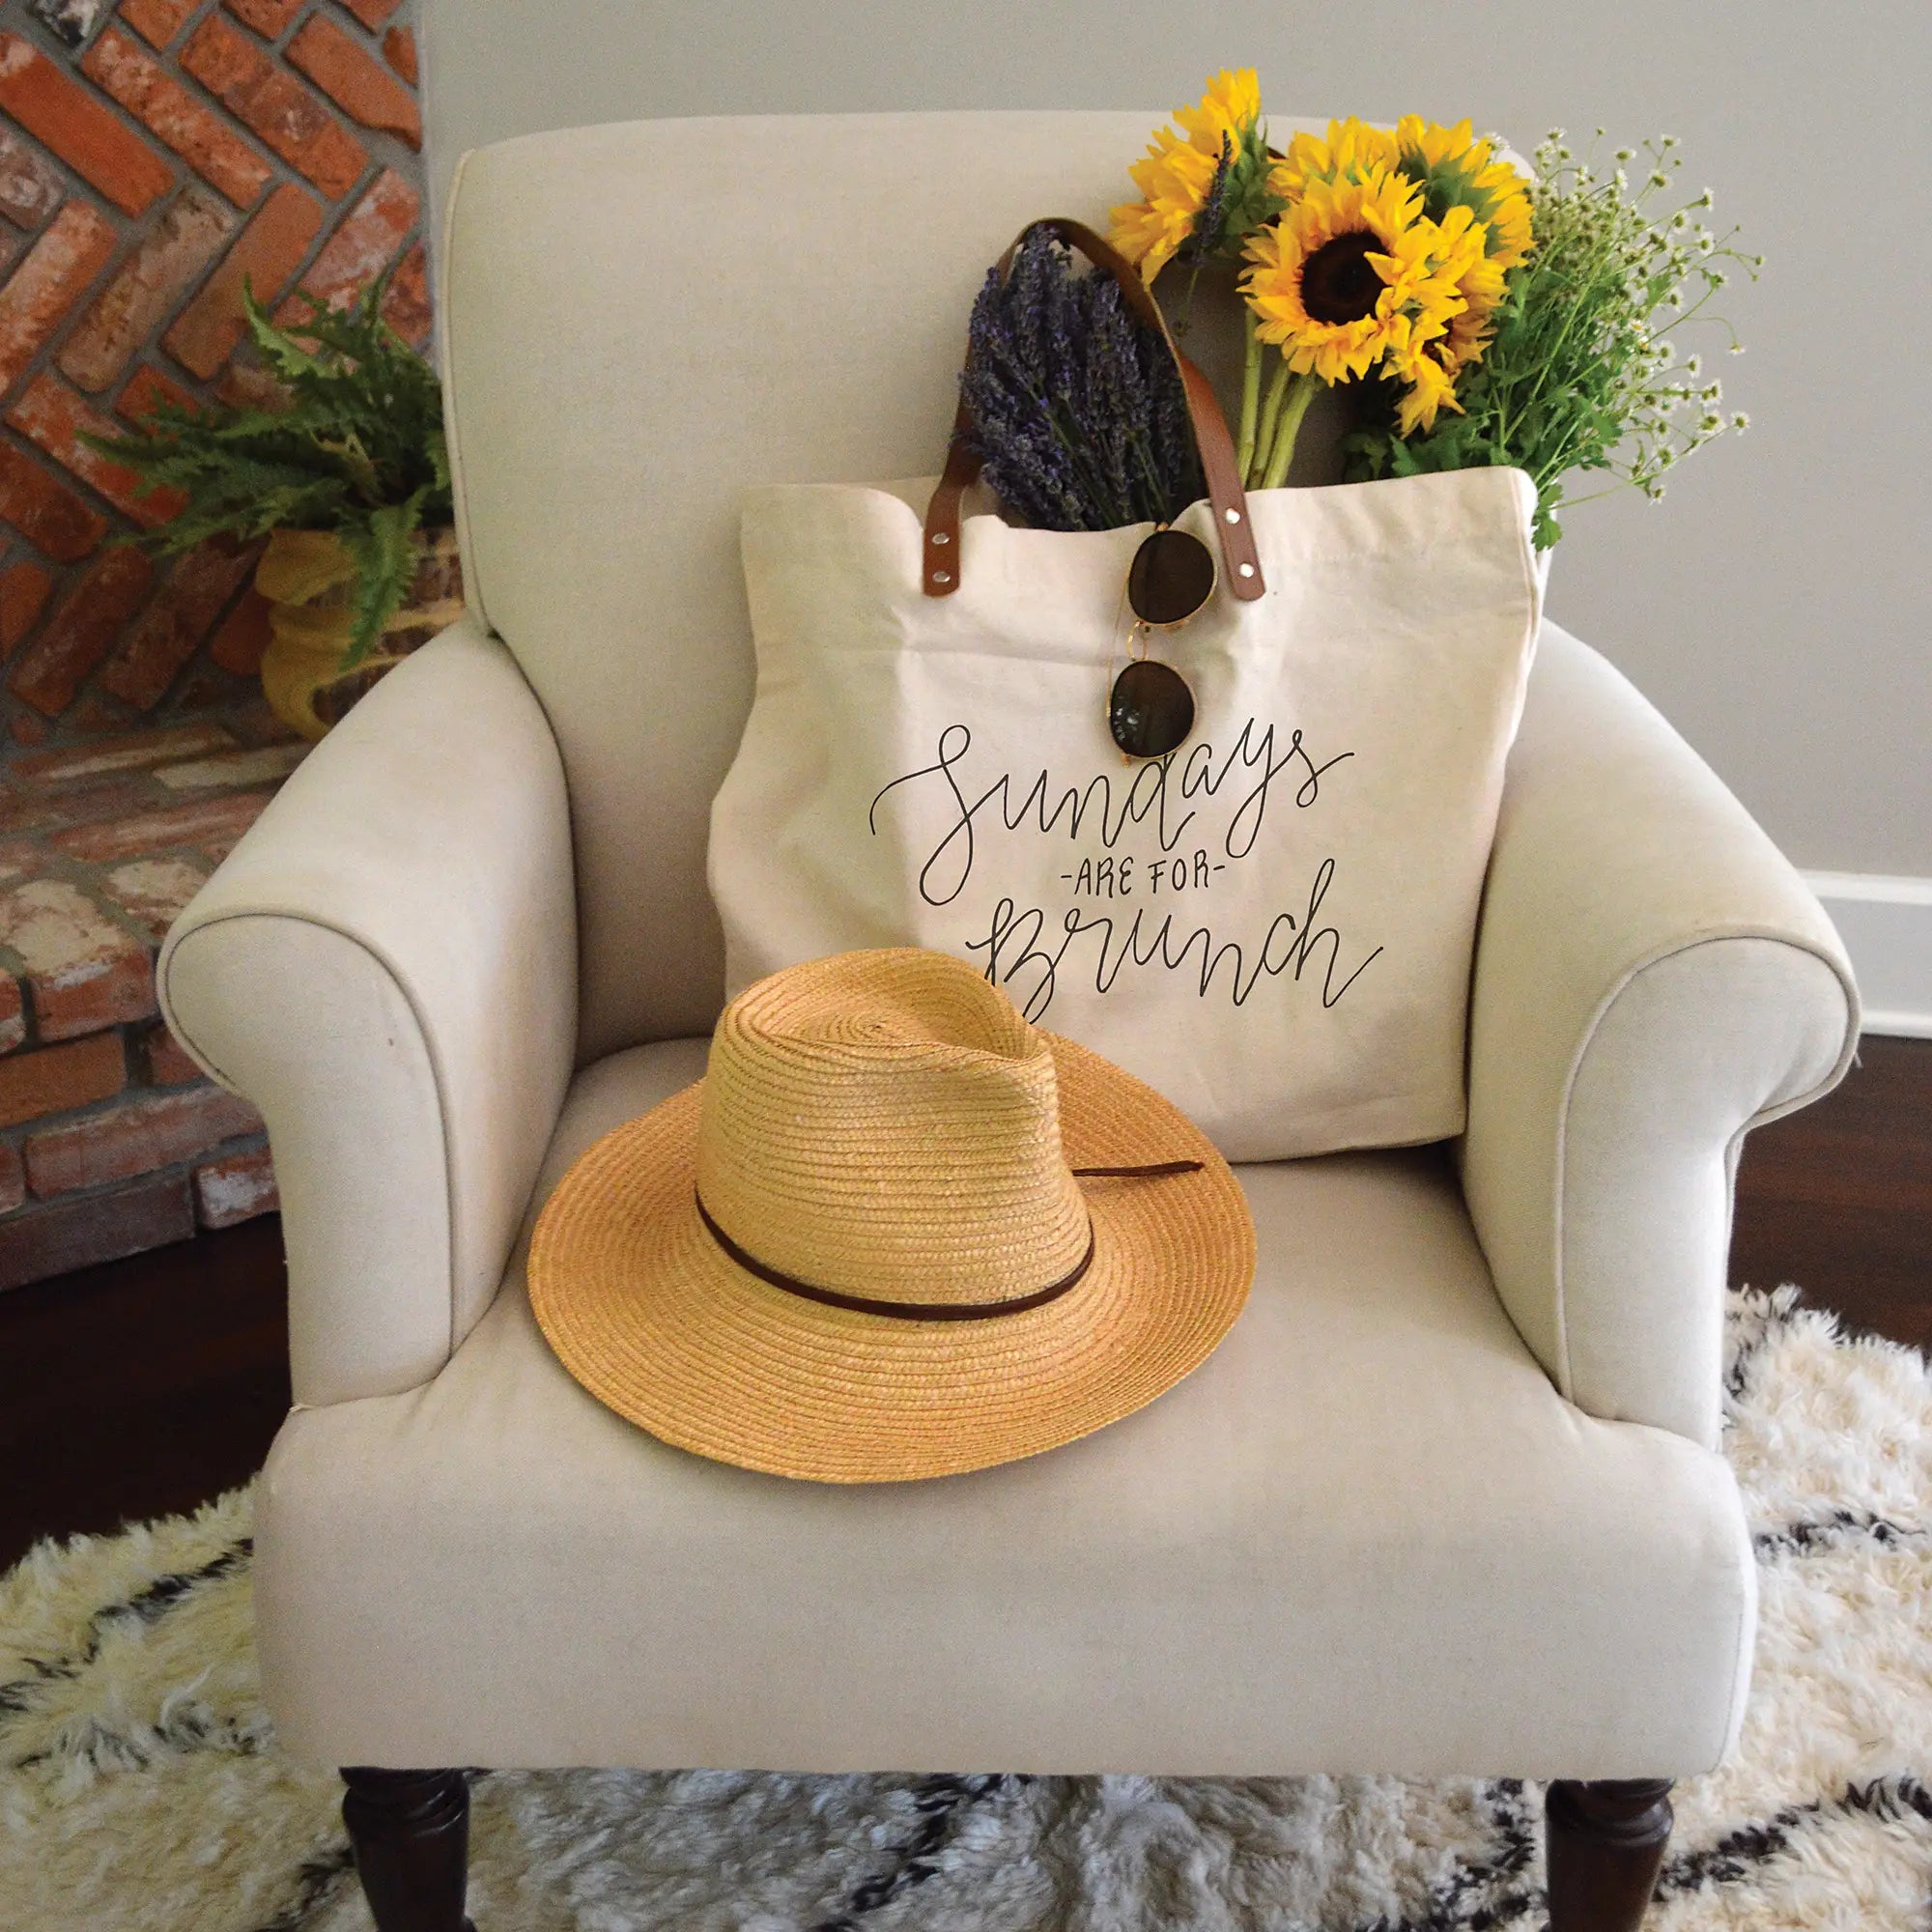 Indoor image of canvas totebag thay says "Sundays are for brunch". The tote is sitting on a white chair with a woman's hat and is filled with bouquets of flowers.